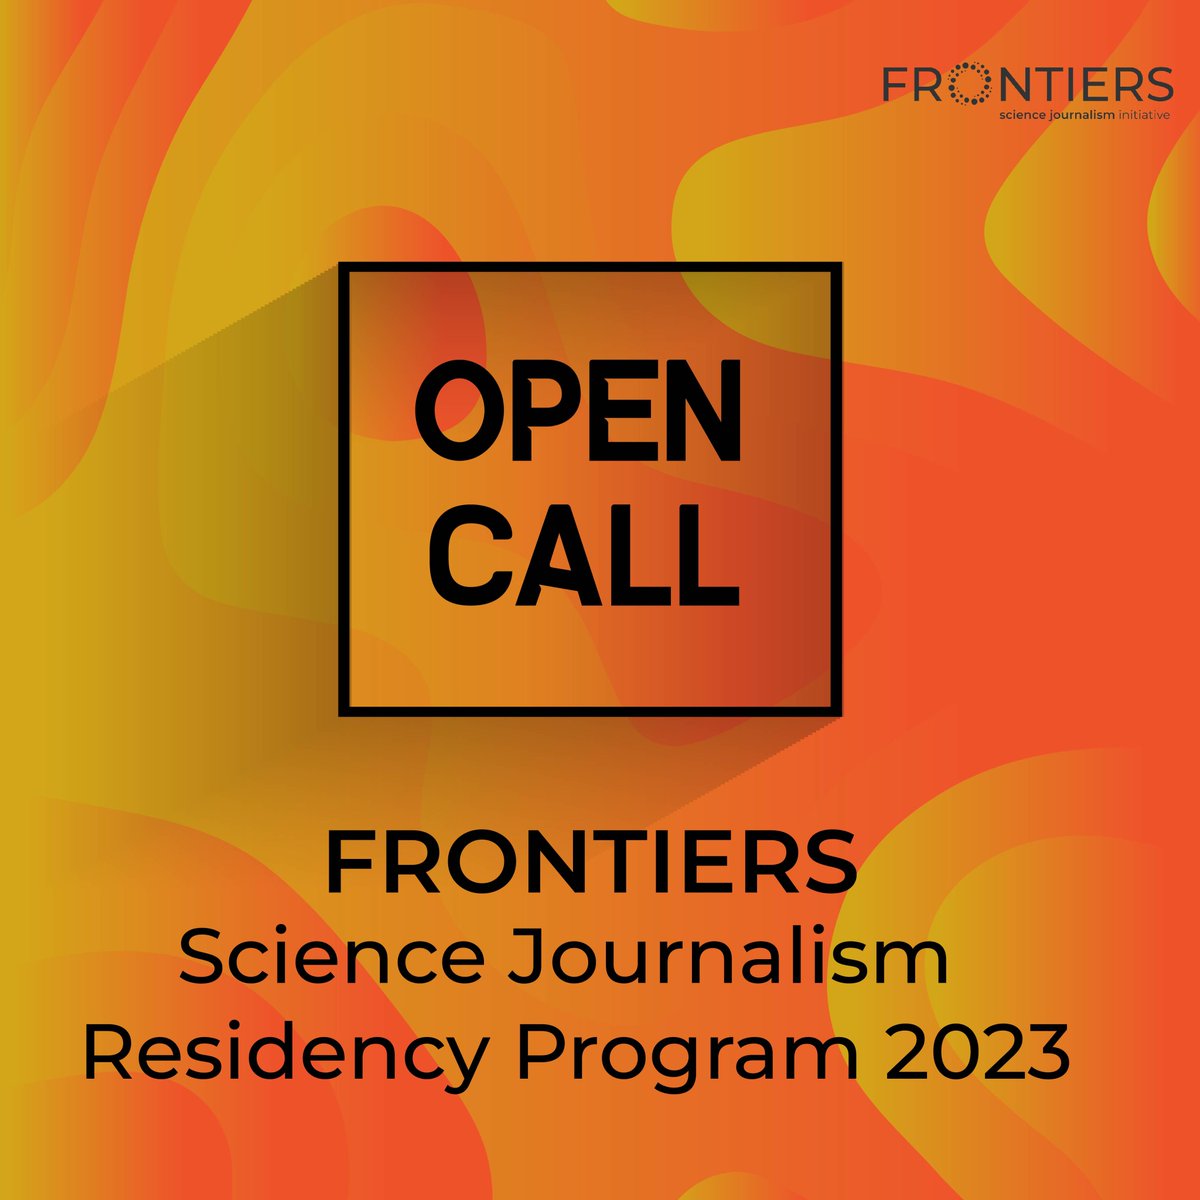 🚨 Open Call 🚨
Applications for the #FRONTIERS Science Journalism Residency Program 2023 are now open!

🔍 More details here: bit.ly/47HZkpM  
📥 Deadline: 5 Mar 2024

#FRONTIERSResidencies #FrontierResearch #ScienceJournalism #CallForApplications #OpenCall #ERC